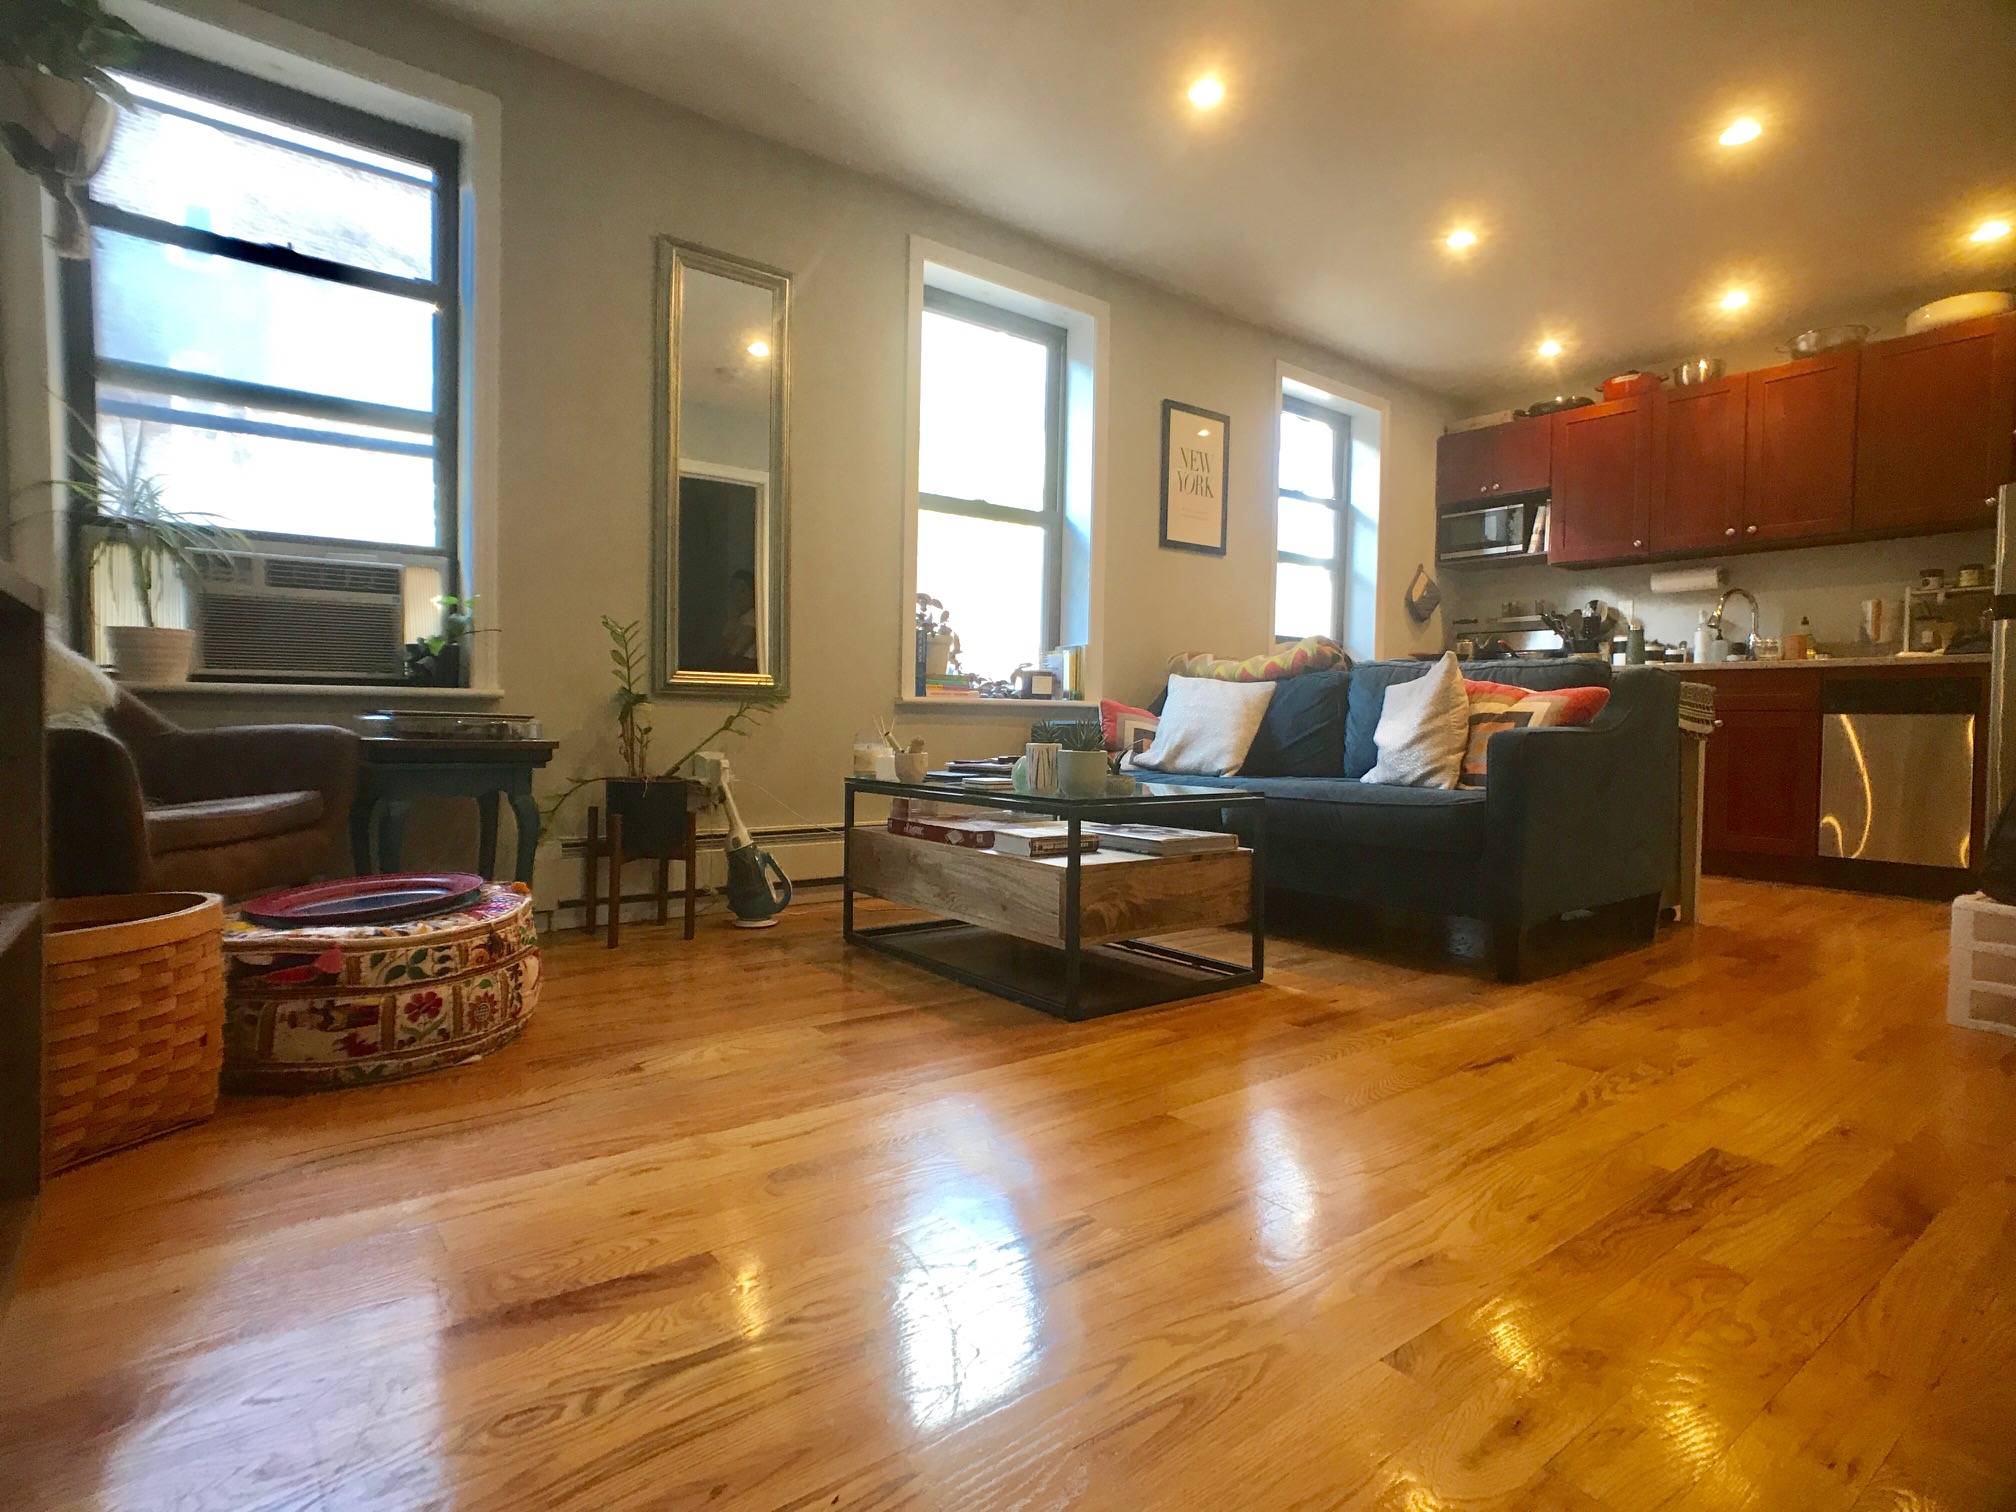 APPROVED APPLICATION PENDING Fantastic and Unique Chelsea 2 Bedroom Duplex !